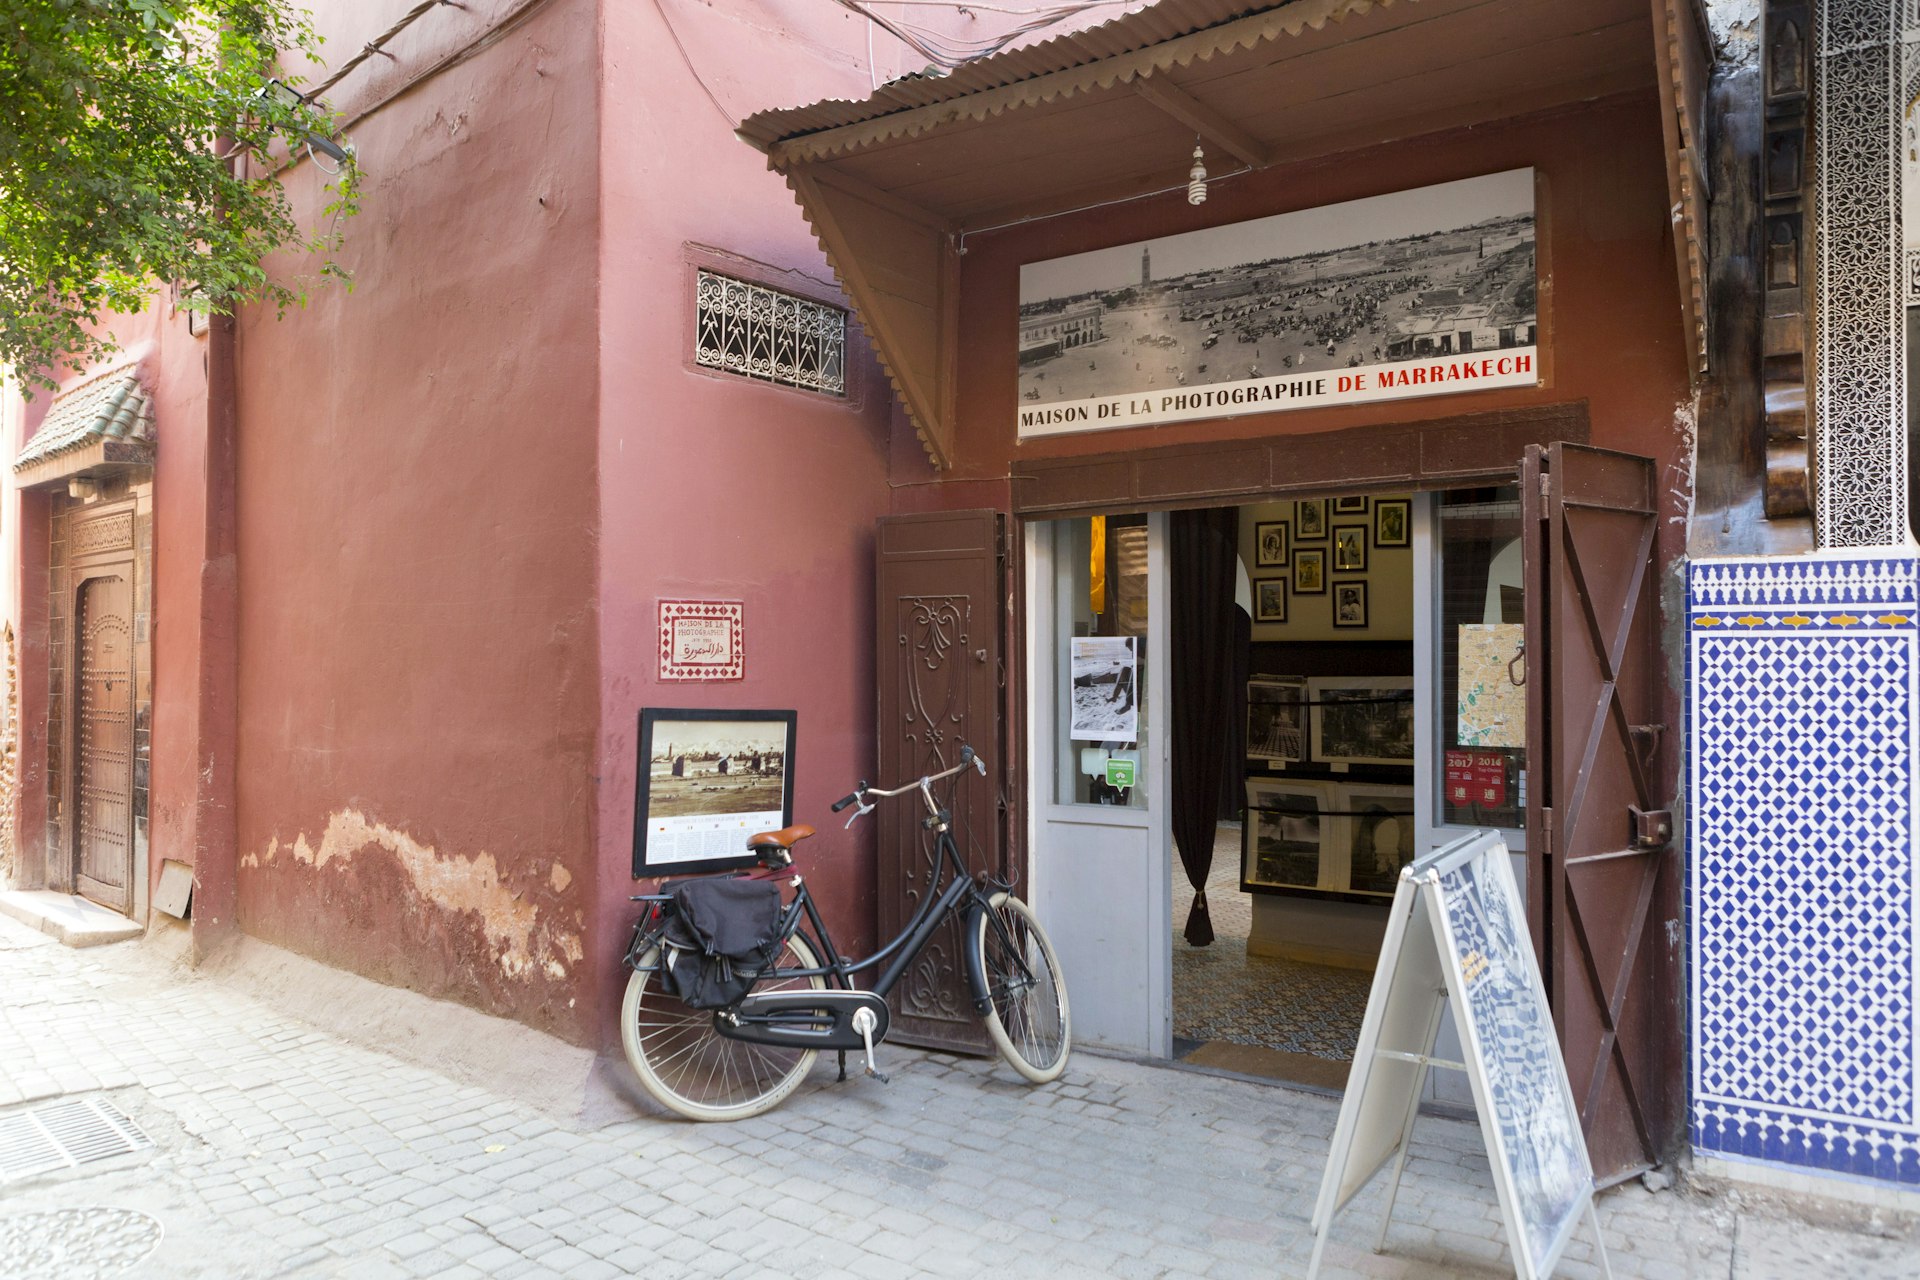 Exterior of the Maison de la Photographie - House of Photography Museum in Marrakesh, Morocco